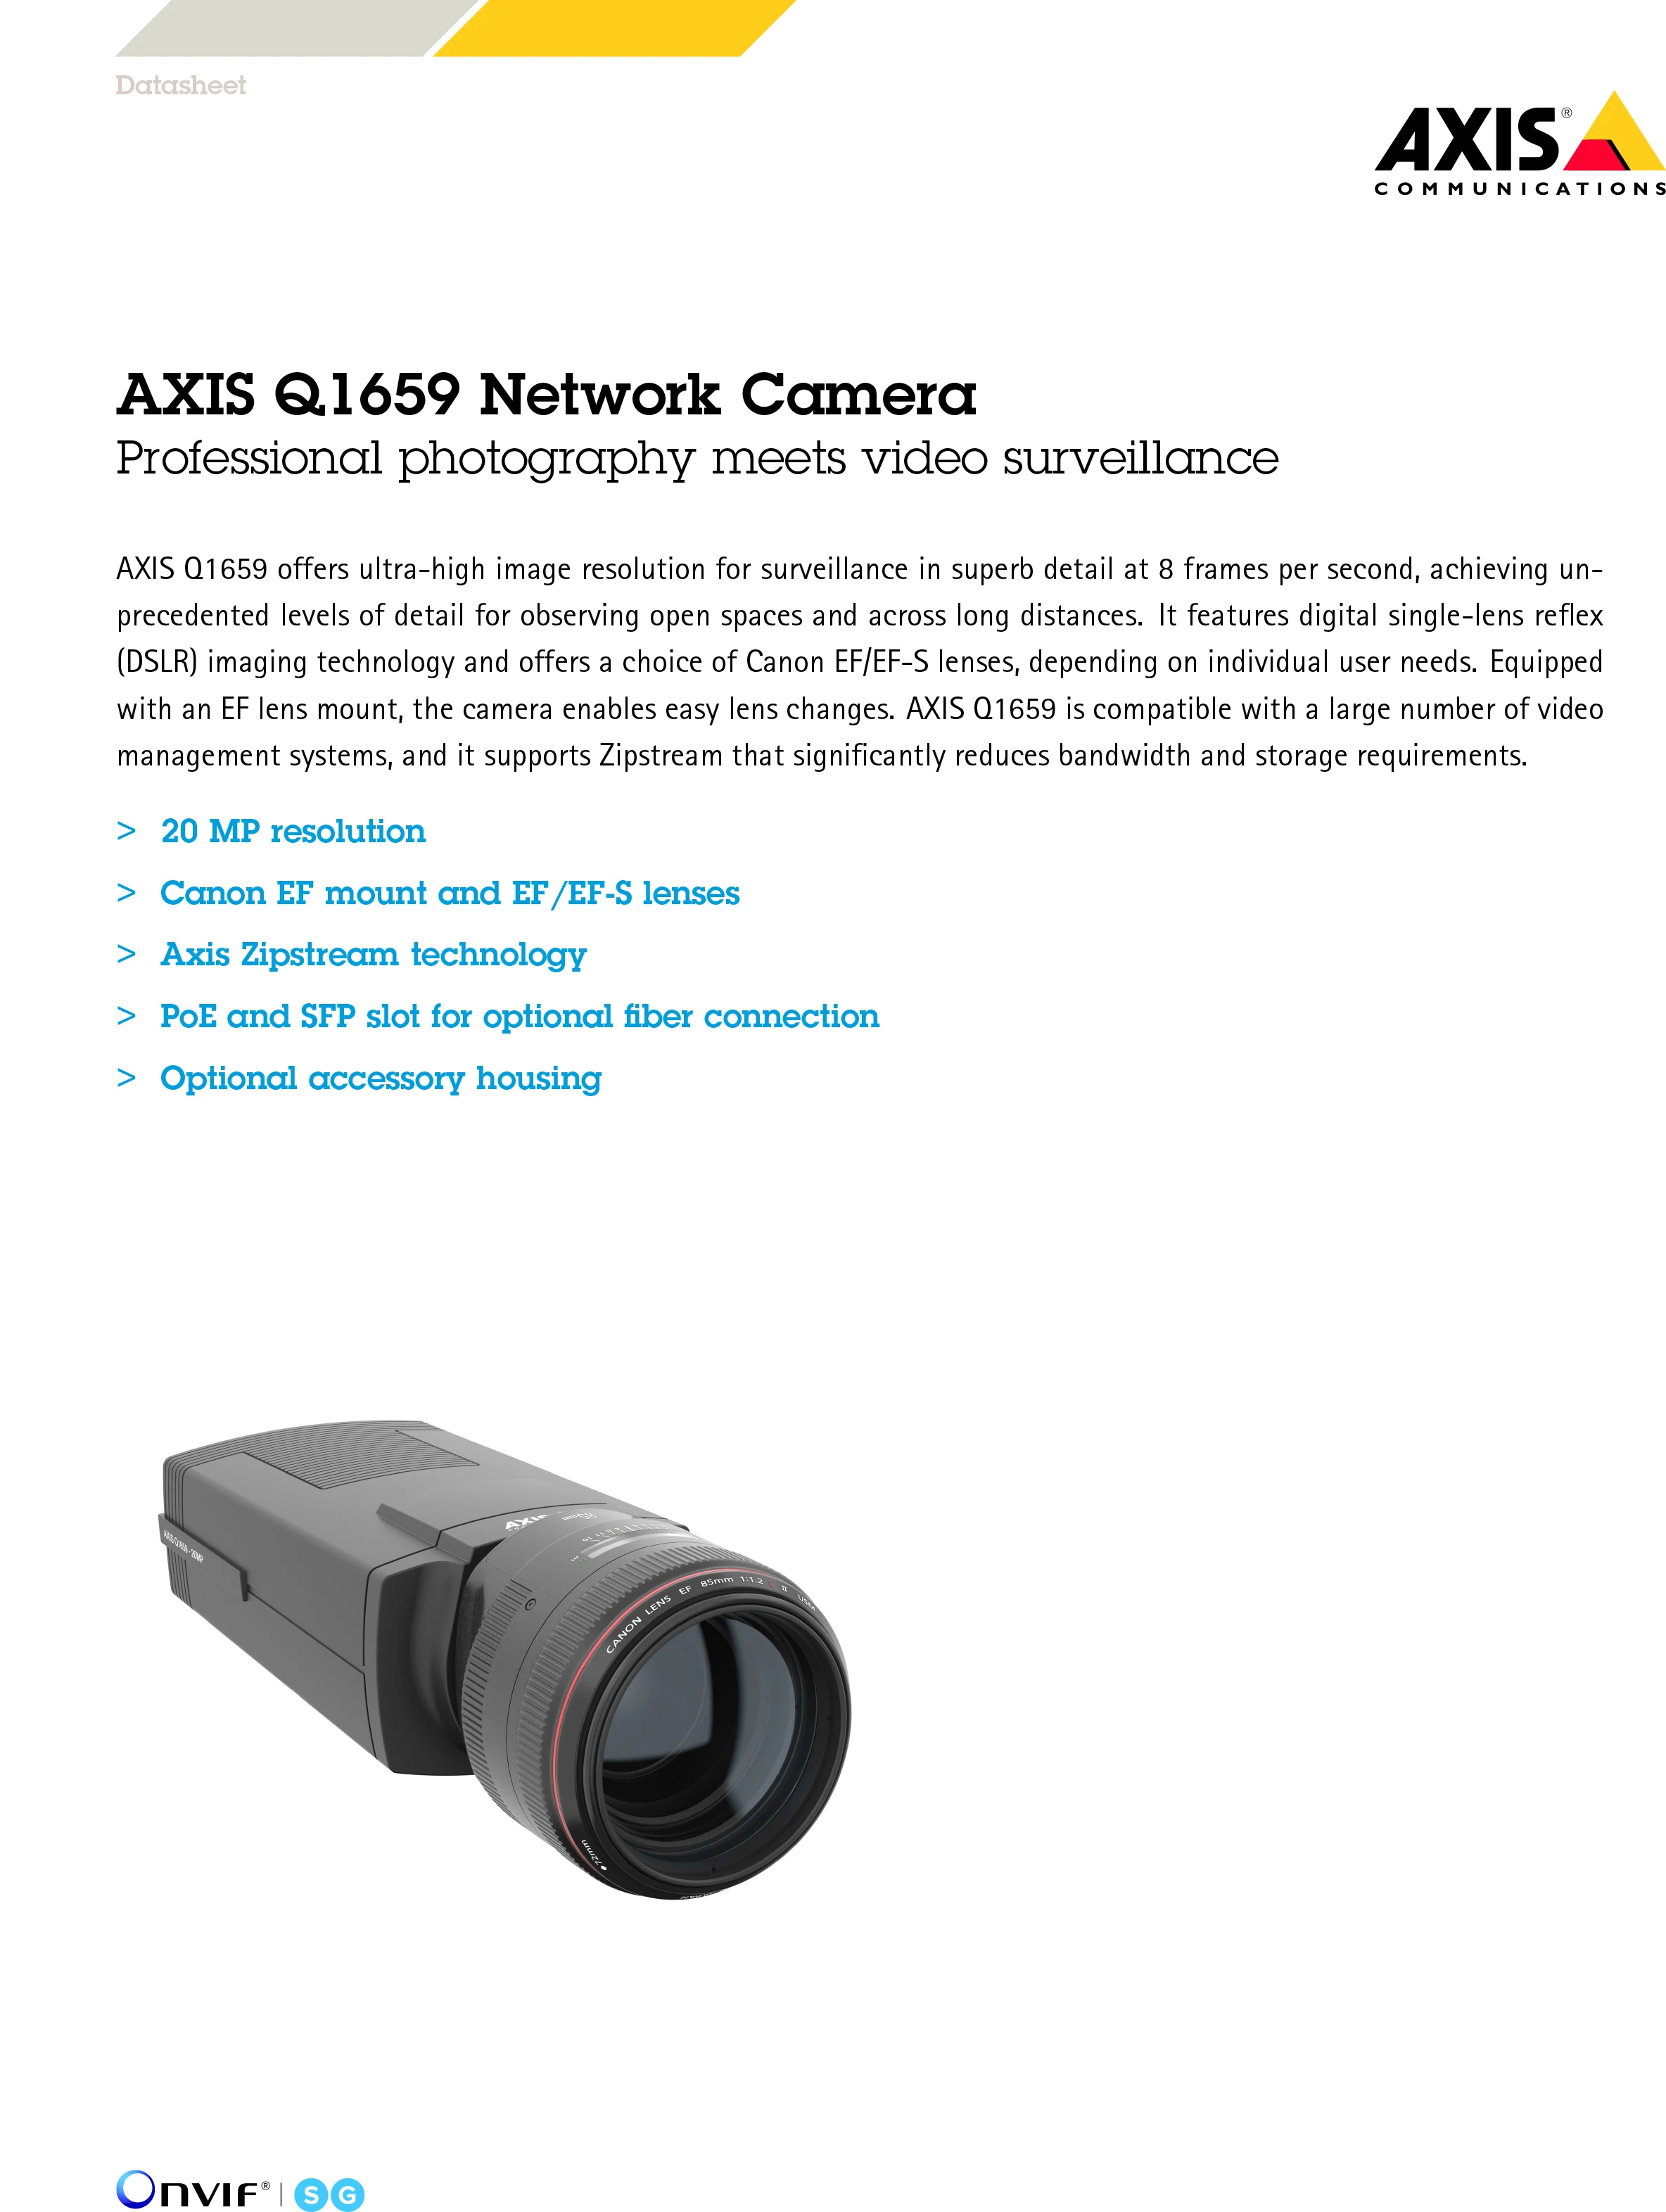 Axis Q1659 10 22mm F 3 5 4 5 Network Camera Professional Photography Meets Video Surveillance Buy Axis Q1659 10 22mm F 3 5 4 5 Network Camera Professional Photography Meets Video Surveillance Product On Alibaba Com